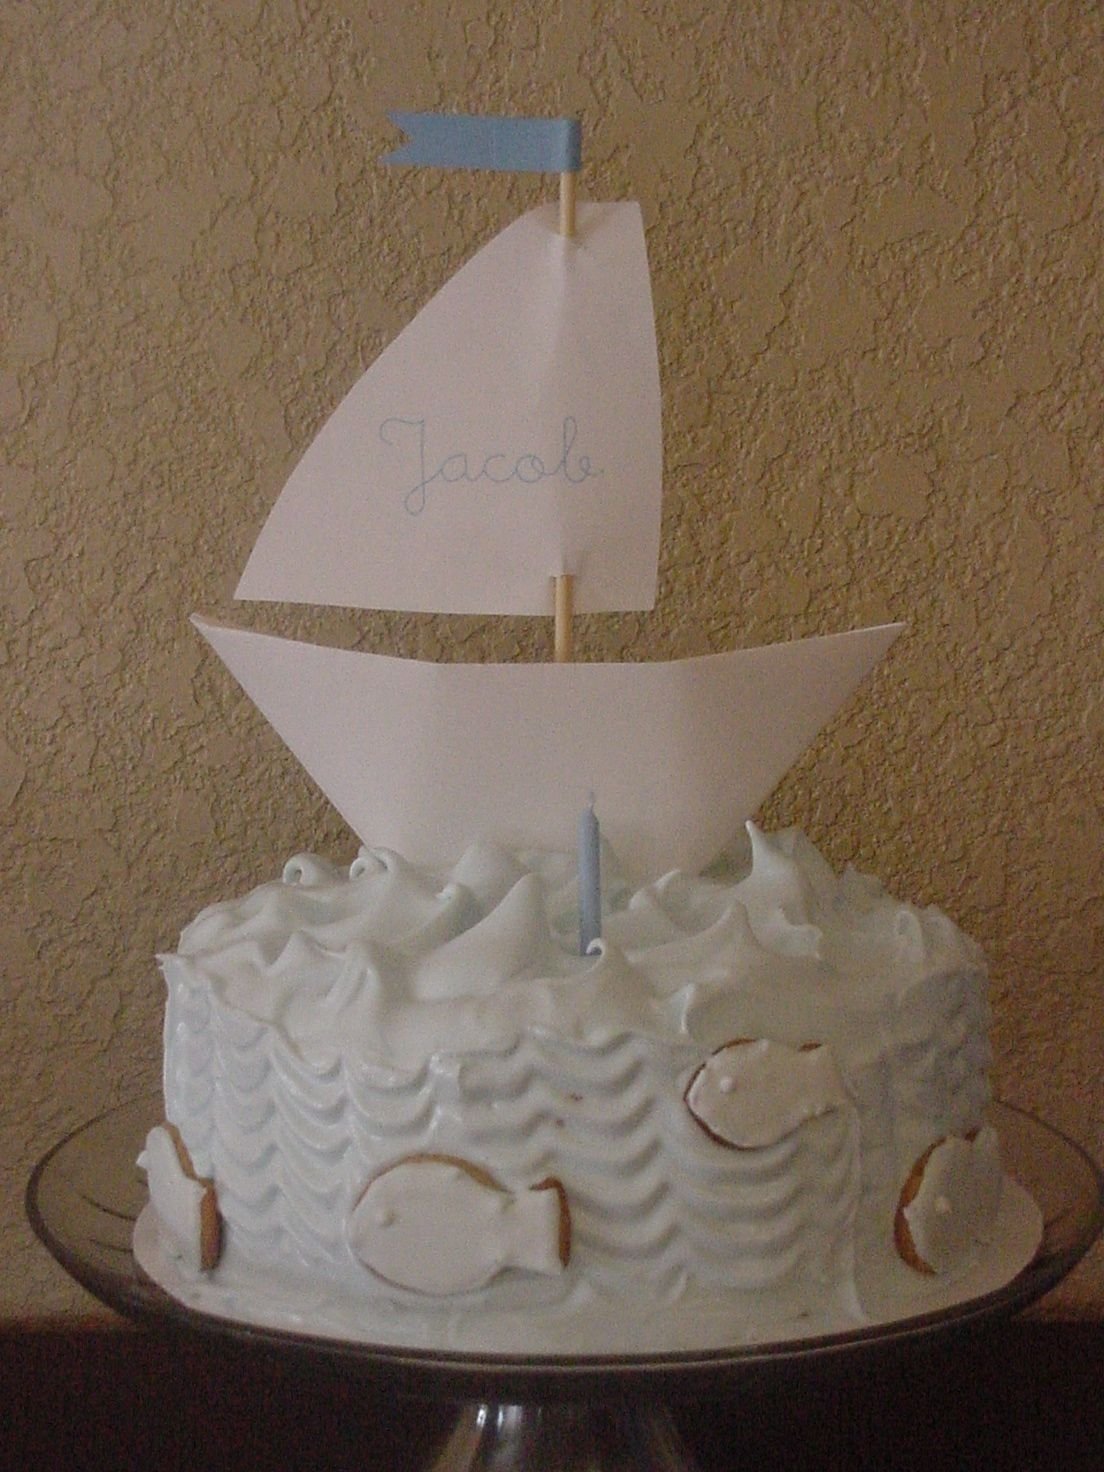 10 Awesome First Birthday Ideas Martha Stewart first birthday sailboat cake this is a cake i made after seeing it 2022